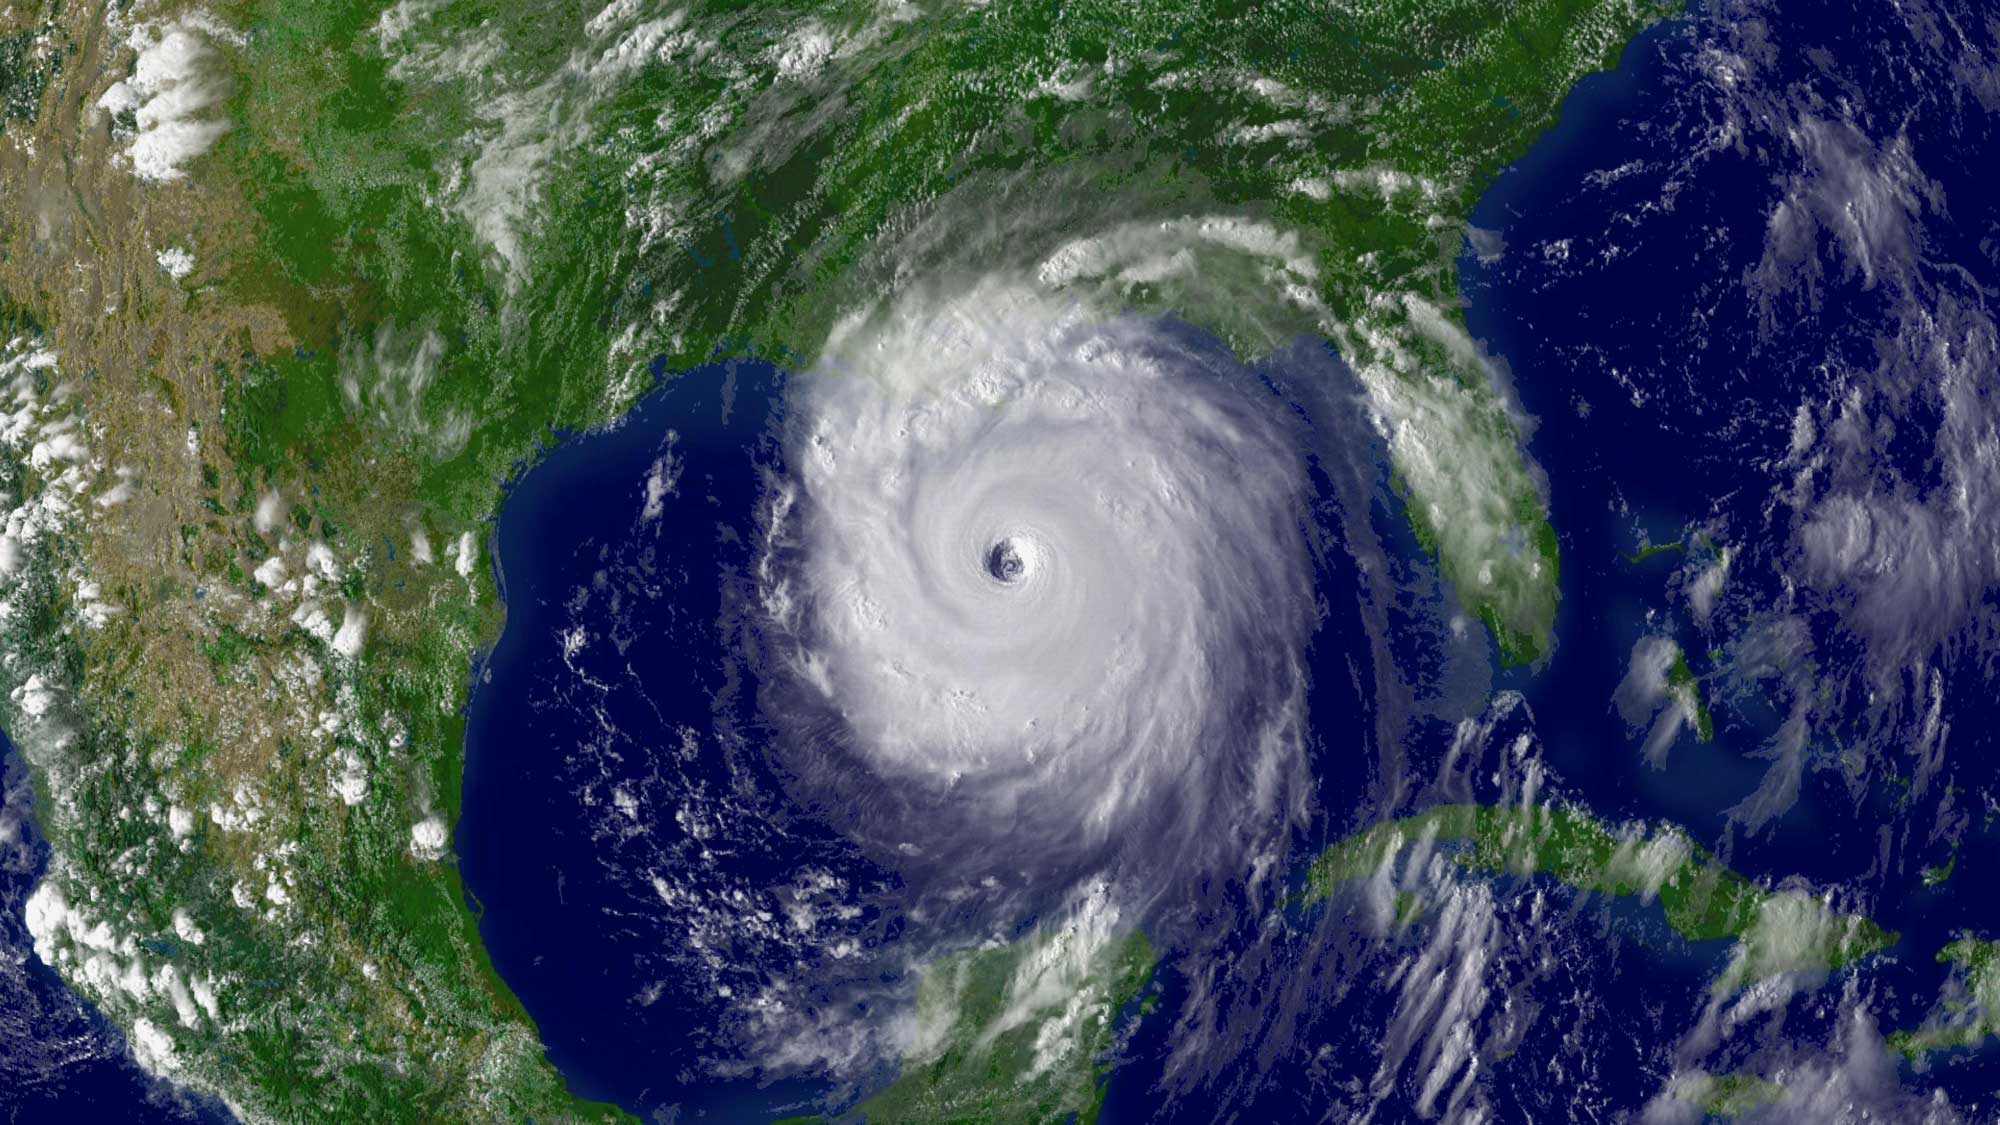 Satellite image of Hurricane Katrina approaching New Orleans in 2005.